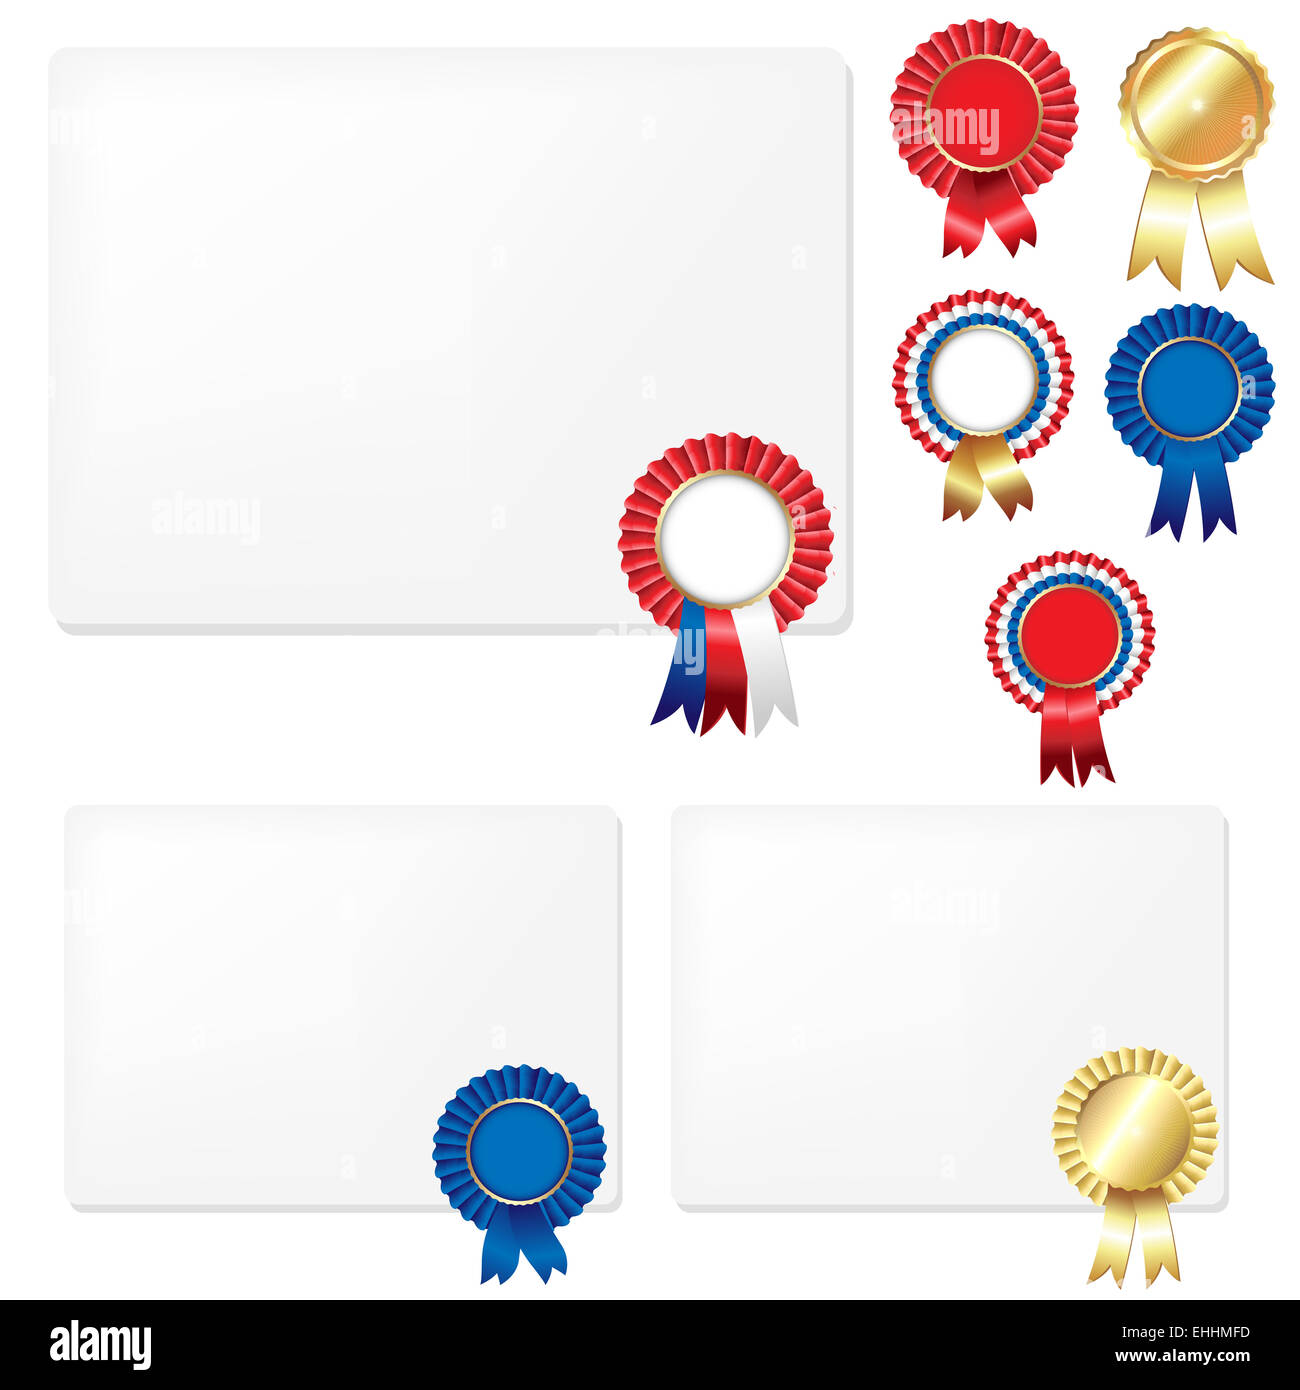 Ribbons Rosette Badge And Blank Gift Tags Stock Photo